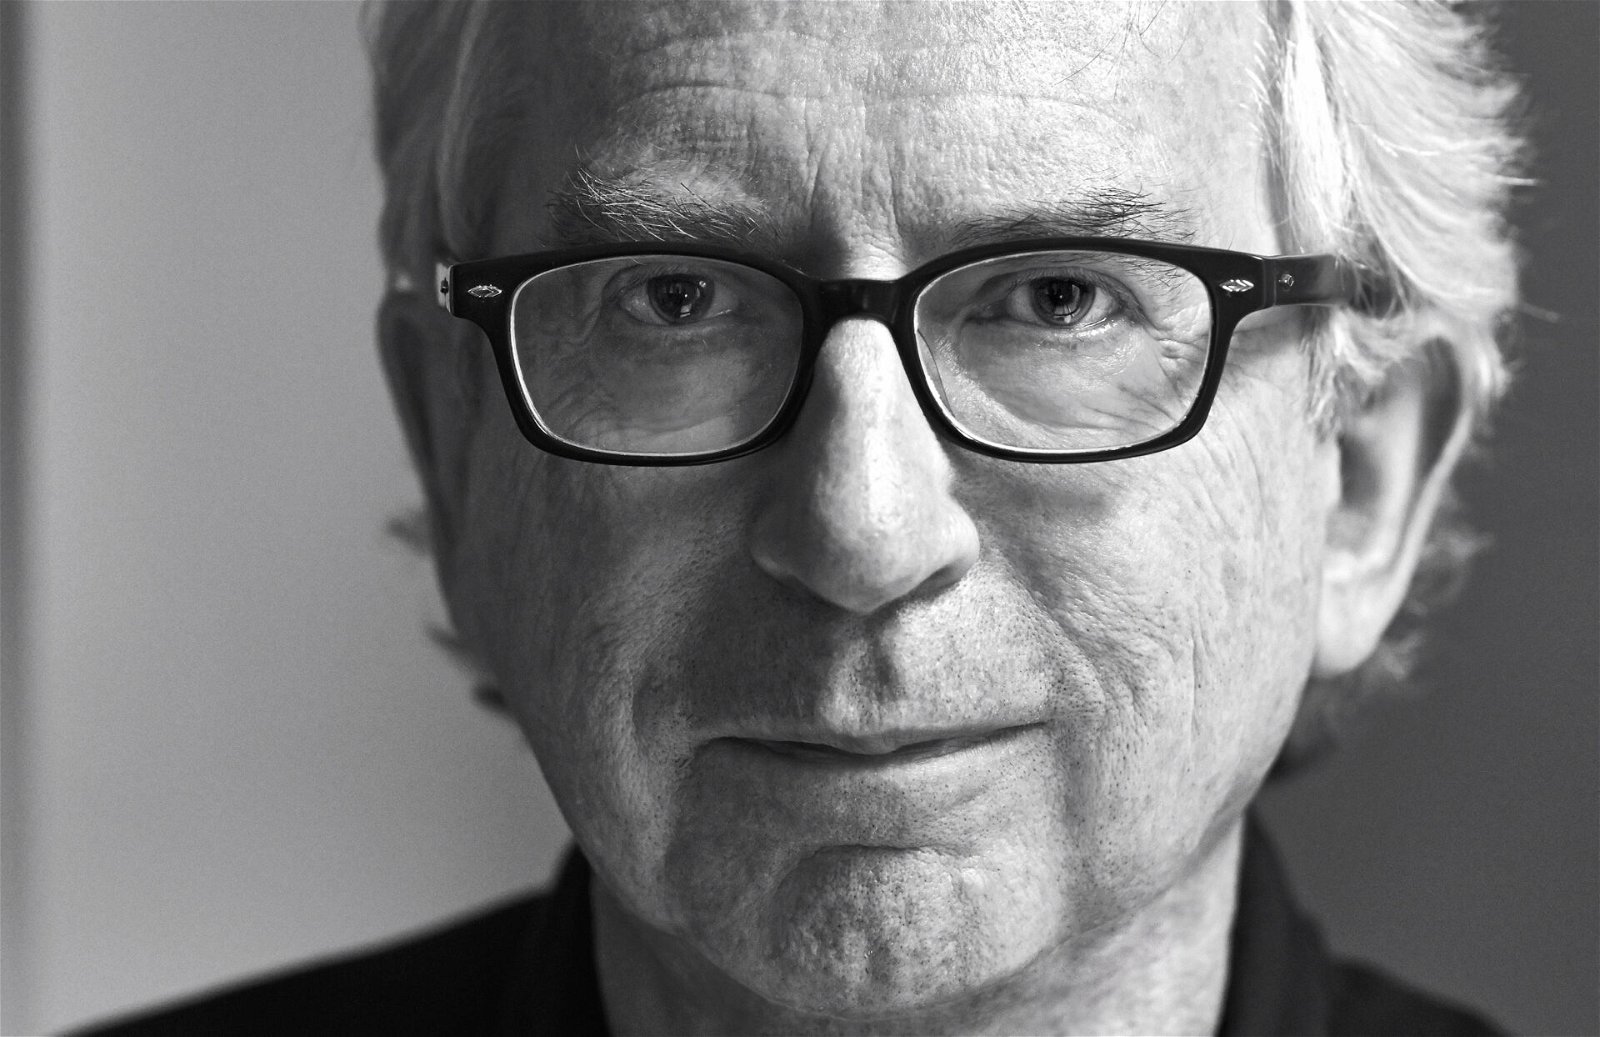 Peter Carey introduces his novel The Chemistry of Tears